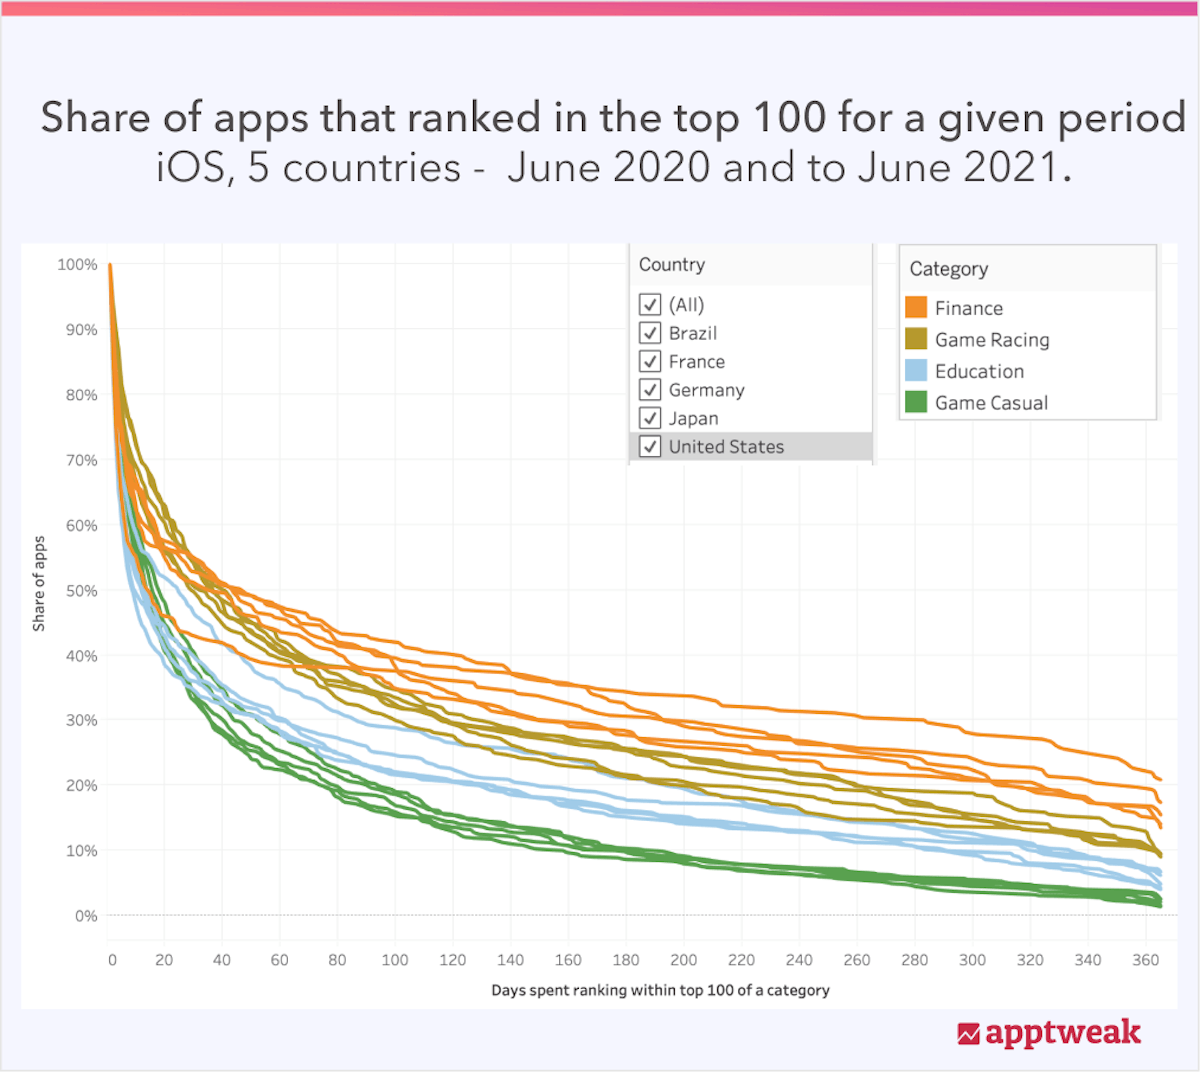 Share of apps that rank top 100 for a given period - by country